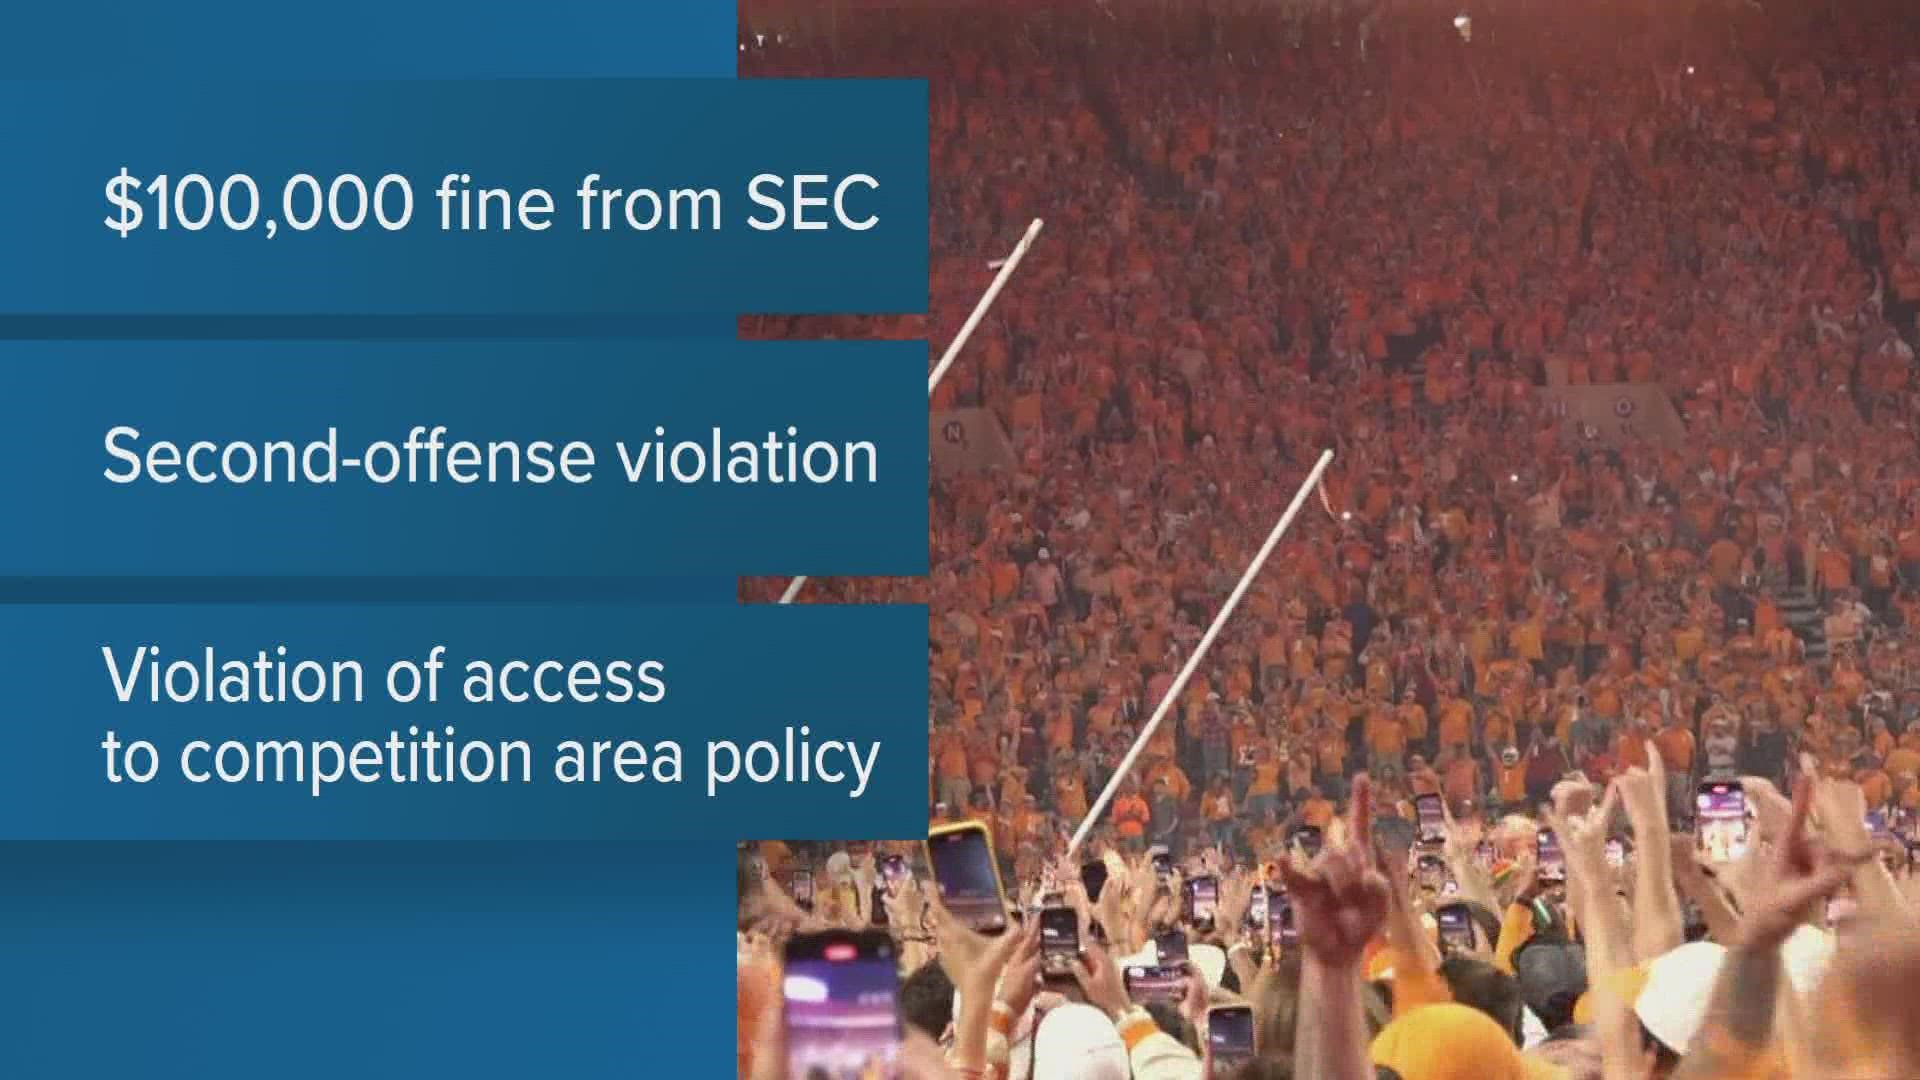 UT will have to pay a $100,000 fine from the SEC. The conference says it's against the league's access to competition area policy.